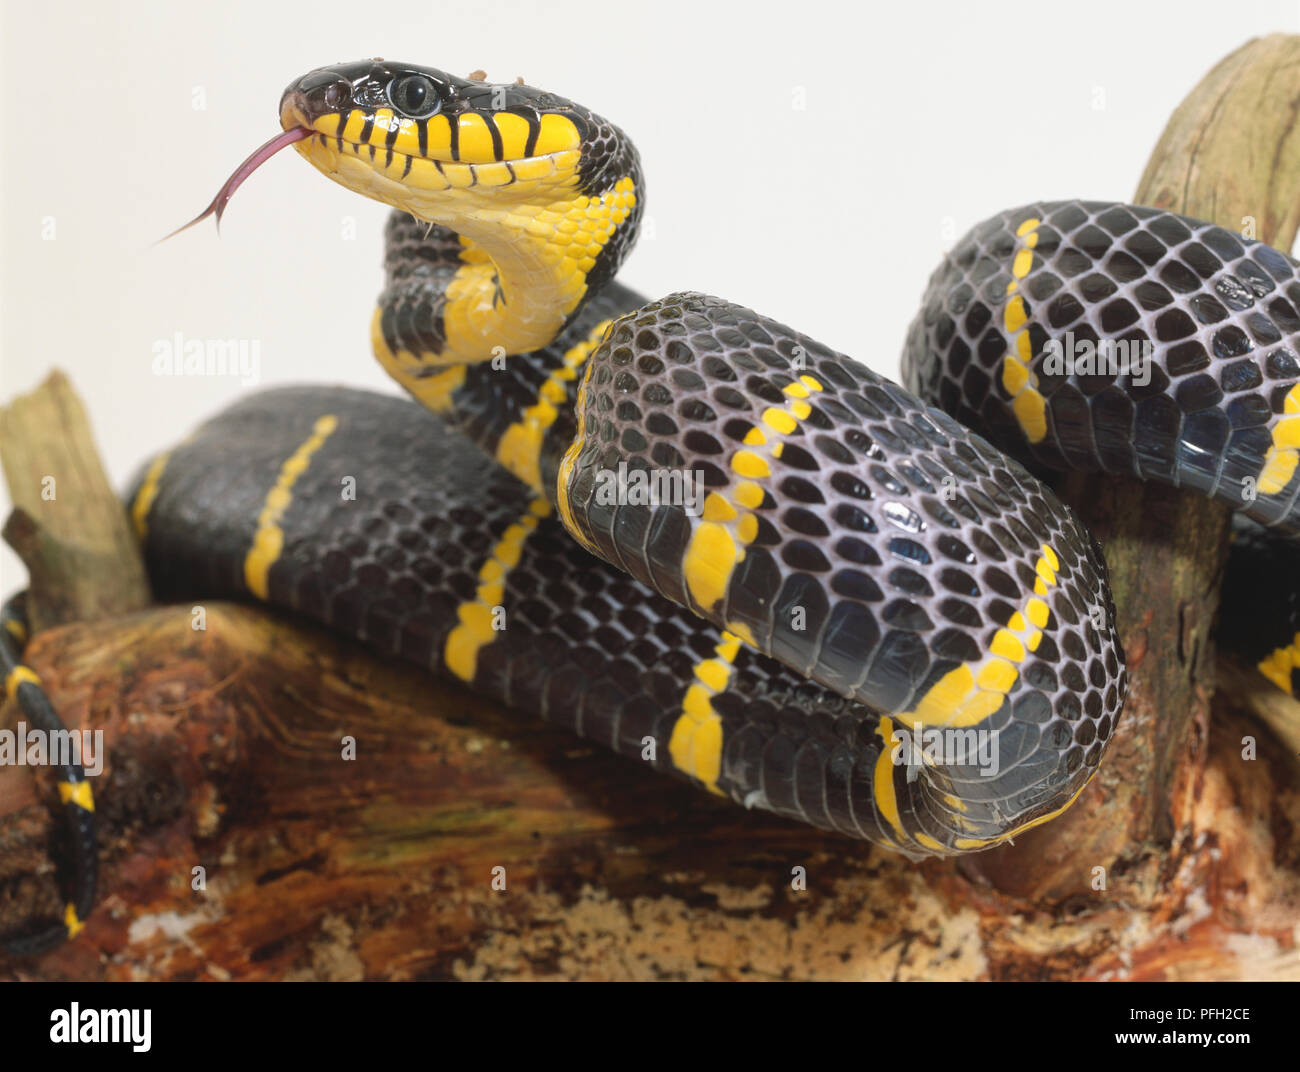 Mangrove snake, striking black and yellow stripes, forked tongue flickering out of notch in upper jaw, above mouth. Stock Photo